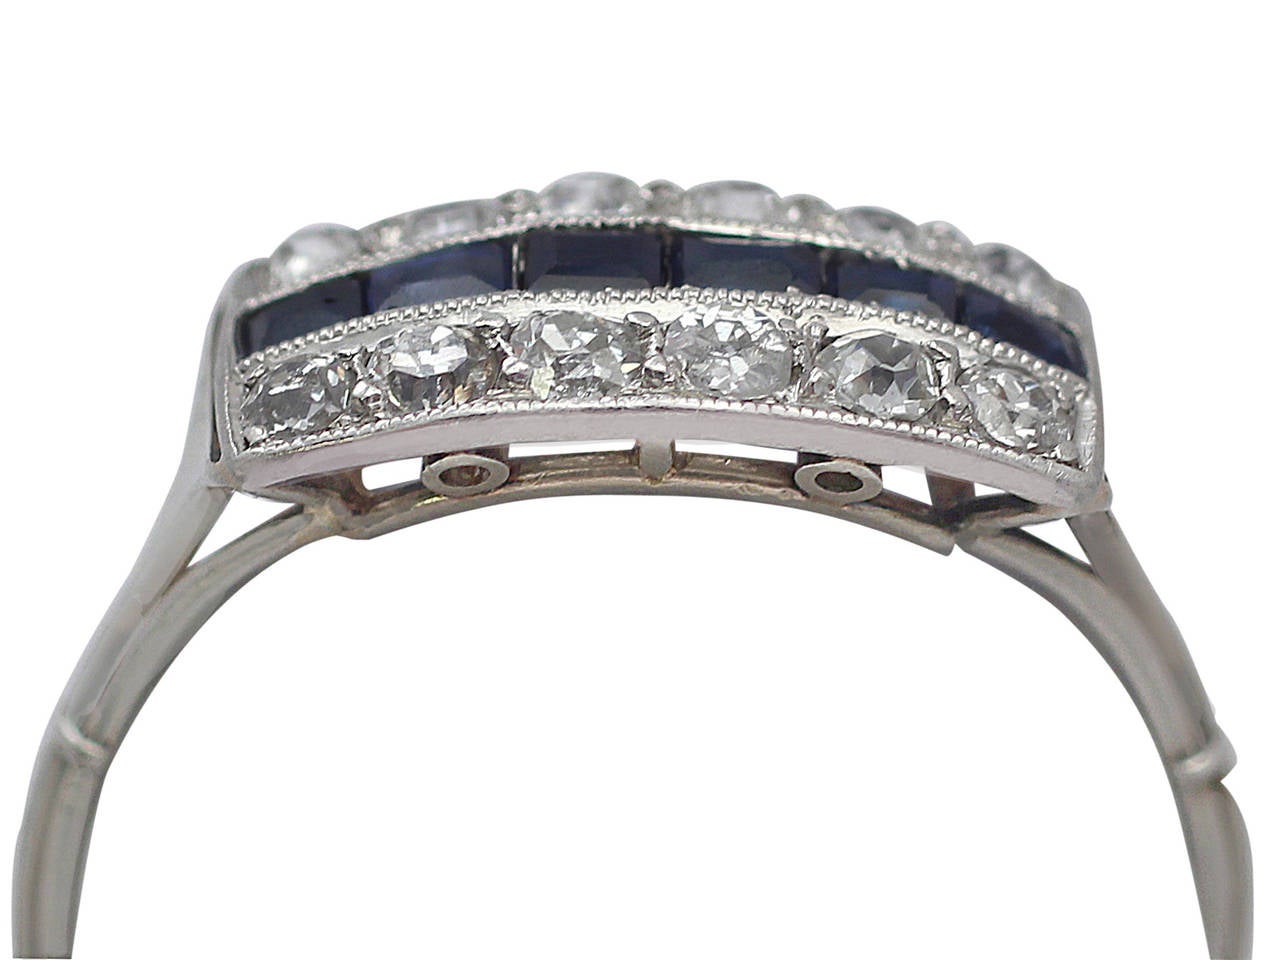 A fine and impressive antique French 0.24 carat natural sapphire and 0.30 carat diamond, 18 karat white gold dress ring; part of our antique jewelry and estate jewelry collections

This fine sapphire and diamond dress ring has been crafted in 18k